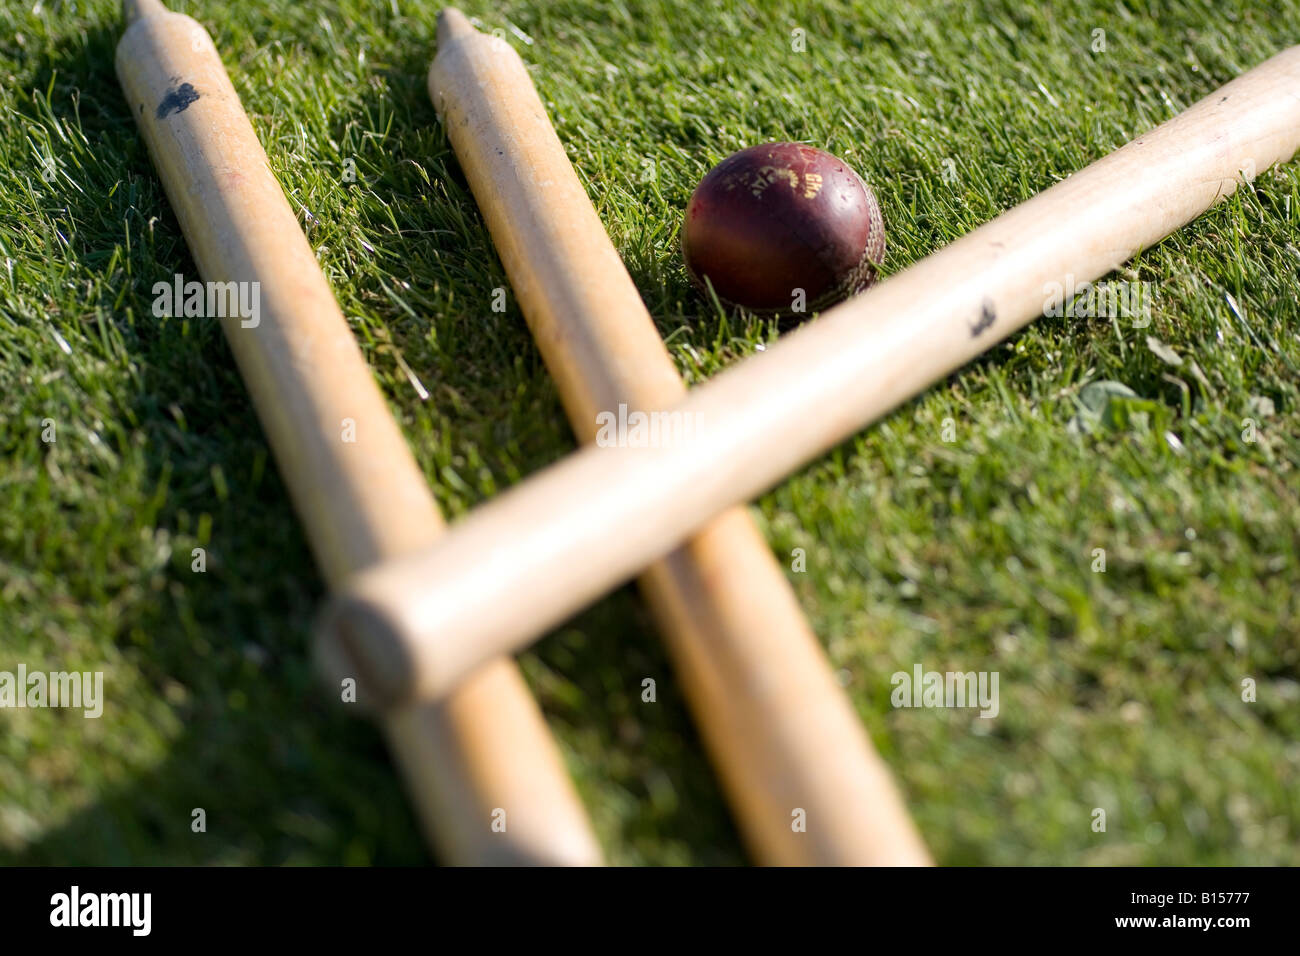 Cricket stumps and ball lie on the grass Stock Photo